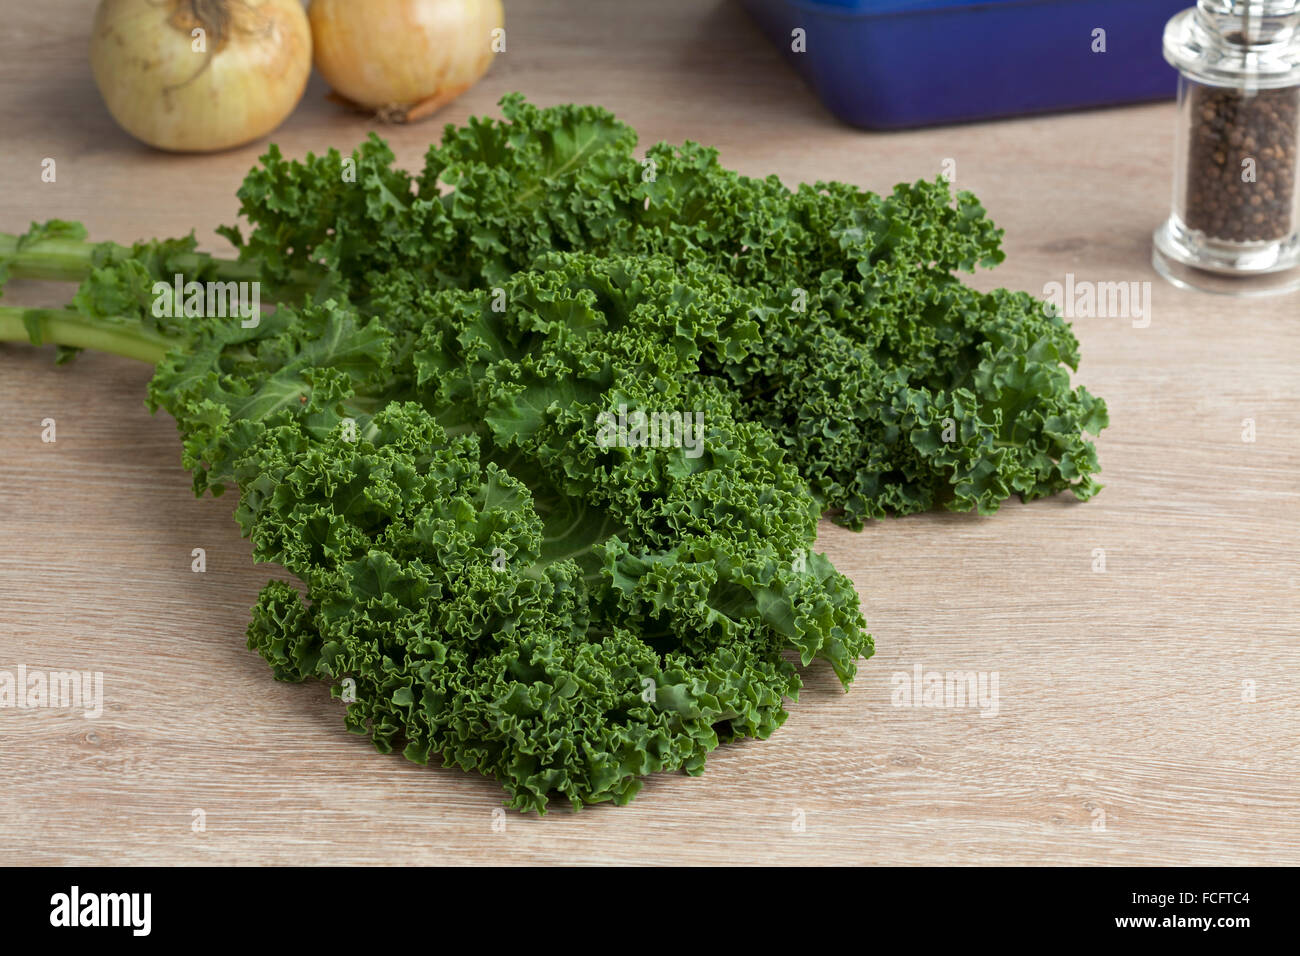 Fresh picked organic curly kale leaves on the table Stock Photo